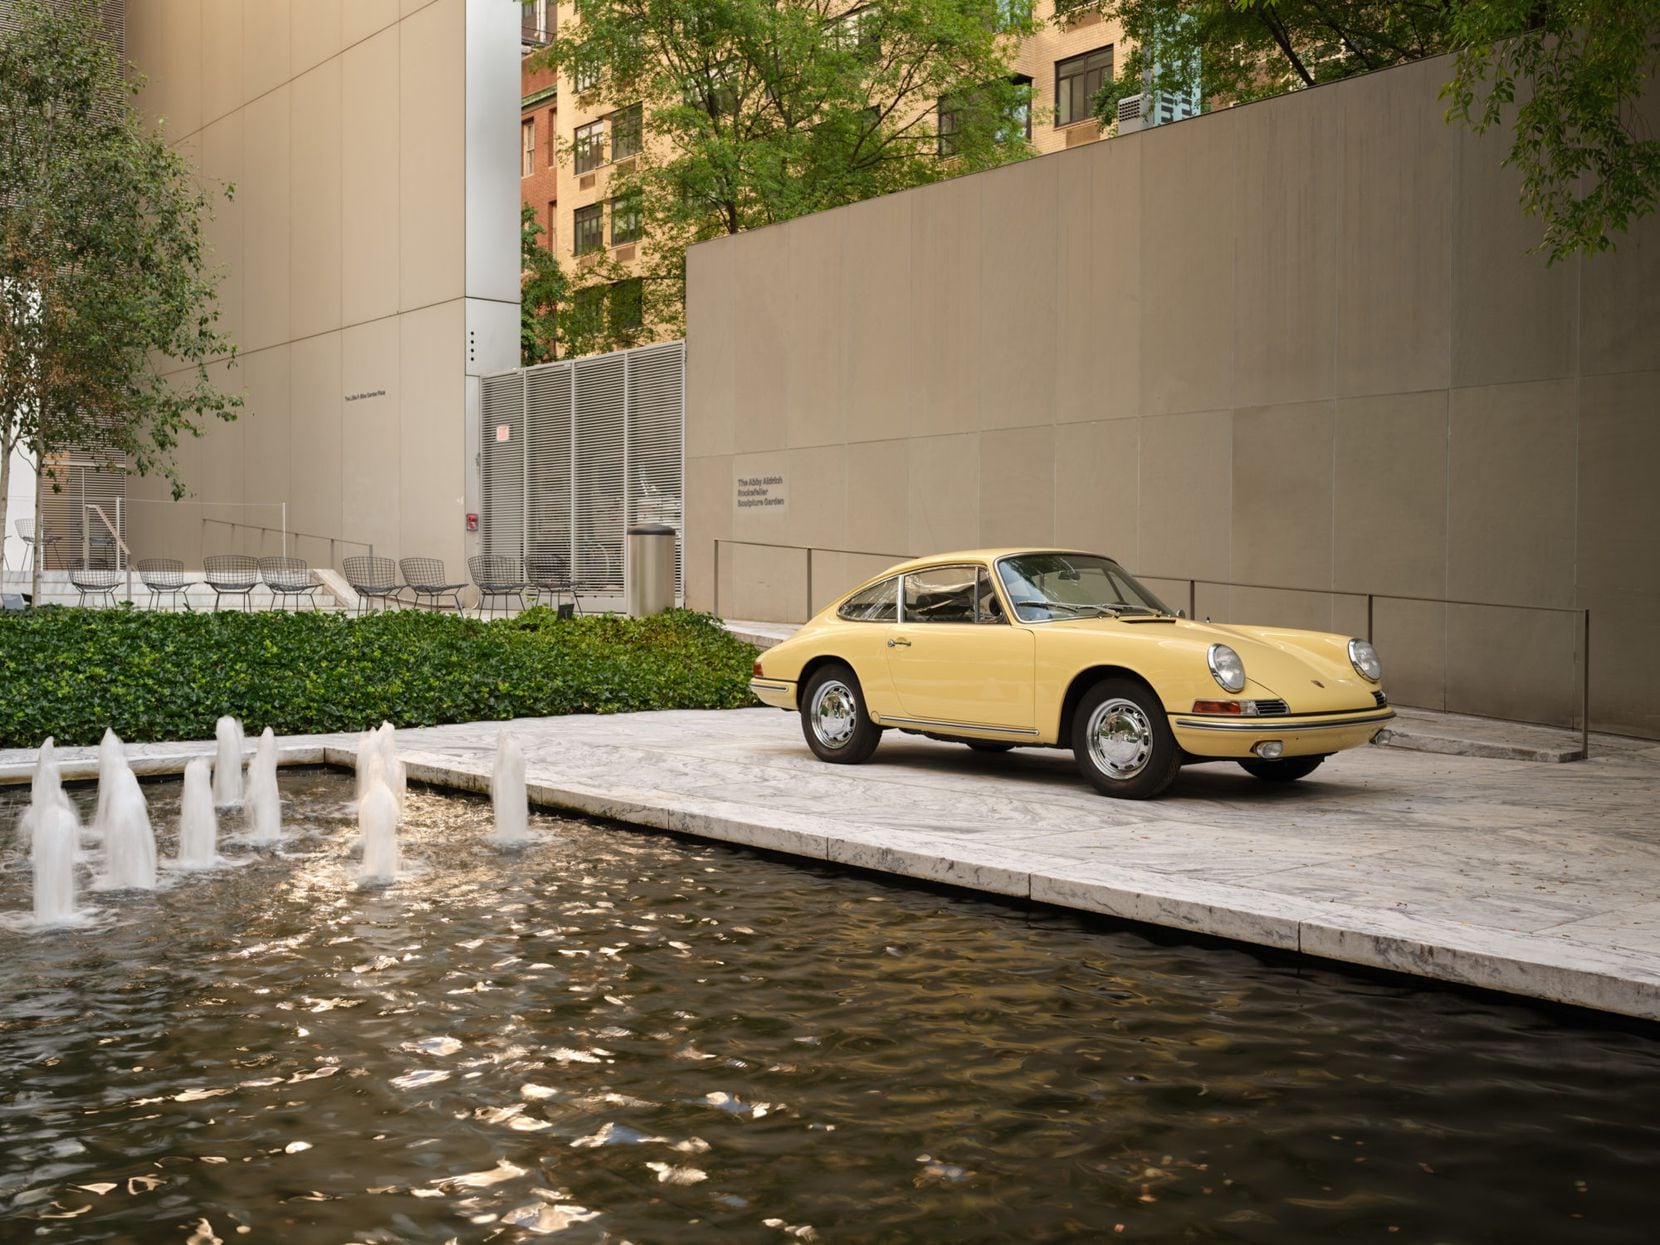 A 1965 Porsche 911 is on display at the Museum of Modern Art, part of the New York institution "Automania" exposure.